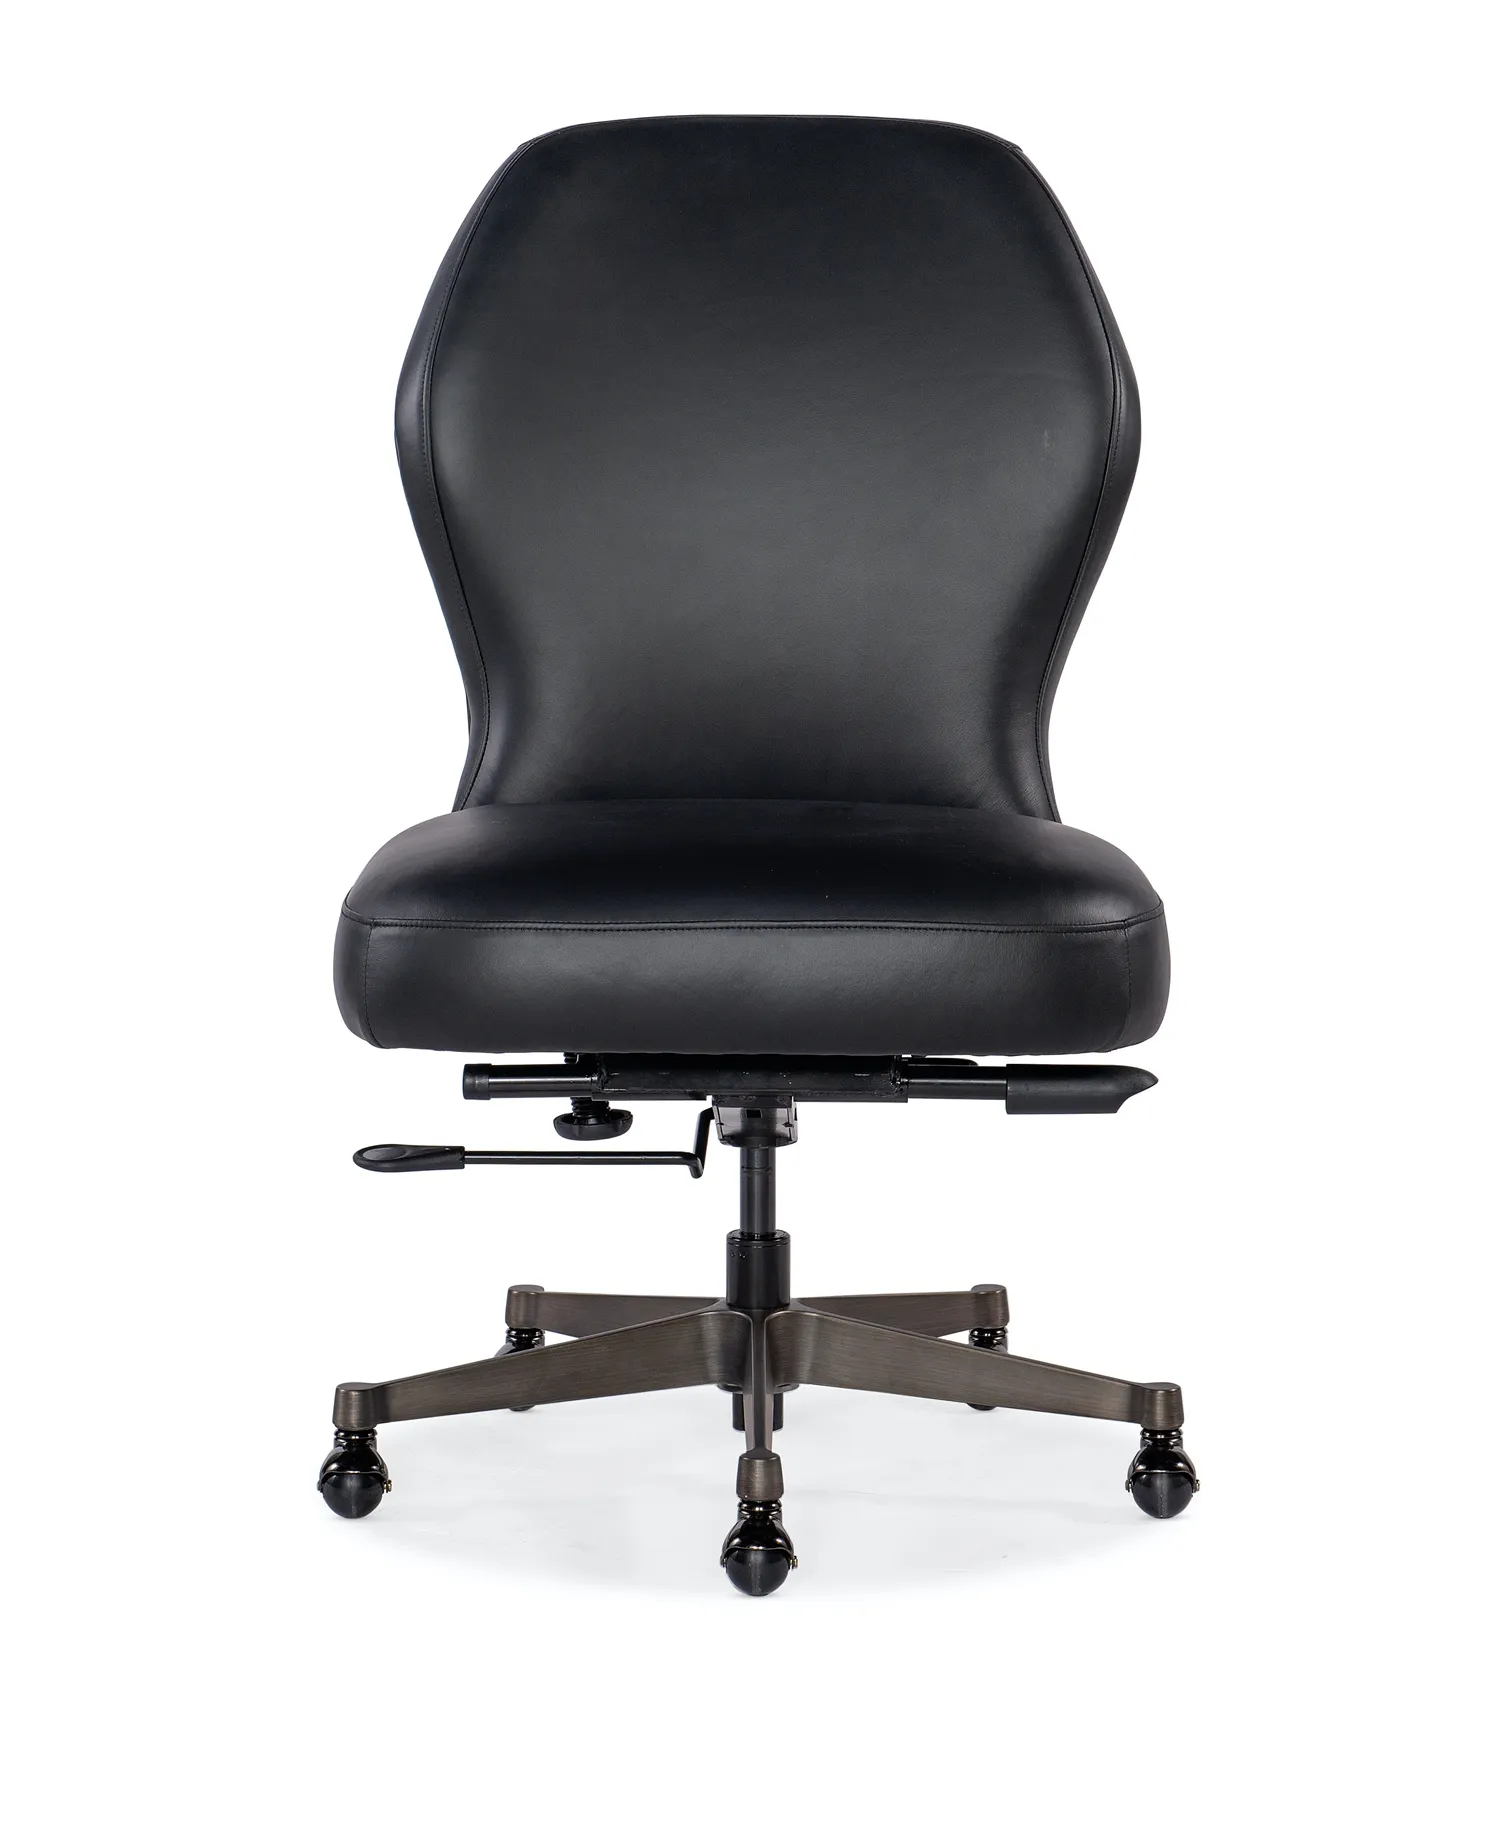 BALI CHARCOAL EXECUTIVE SWIVEL TILT OFFICE LEATHER CHAIR